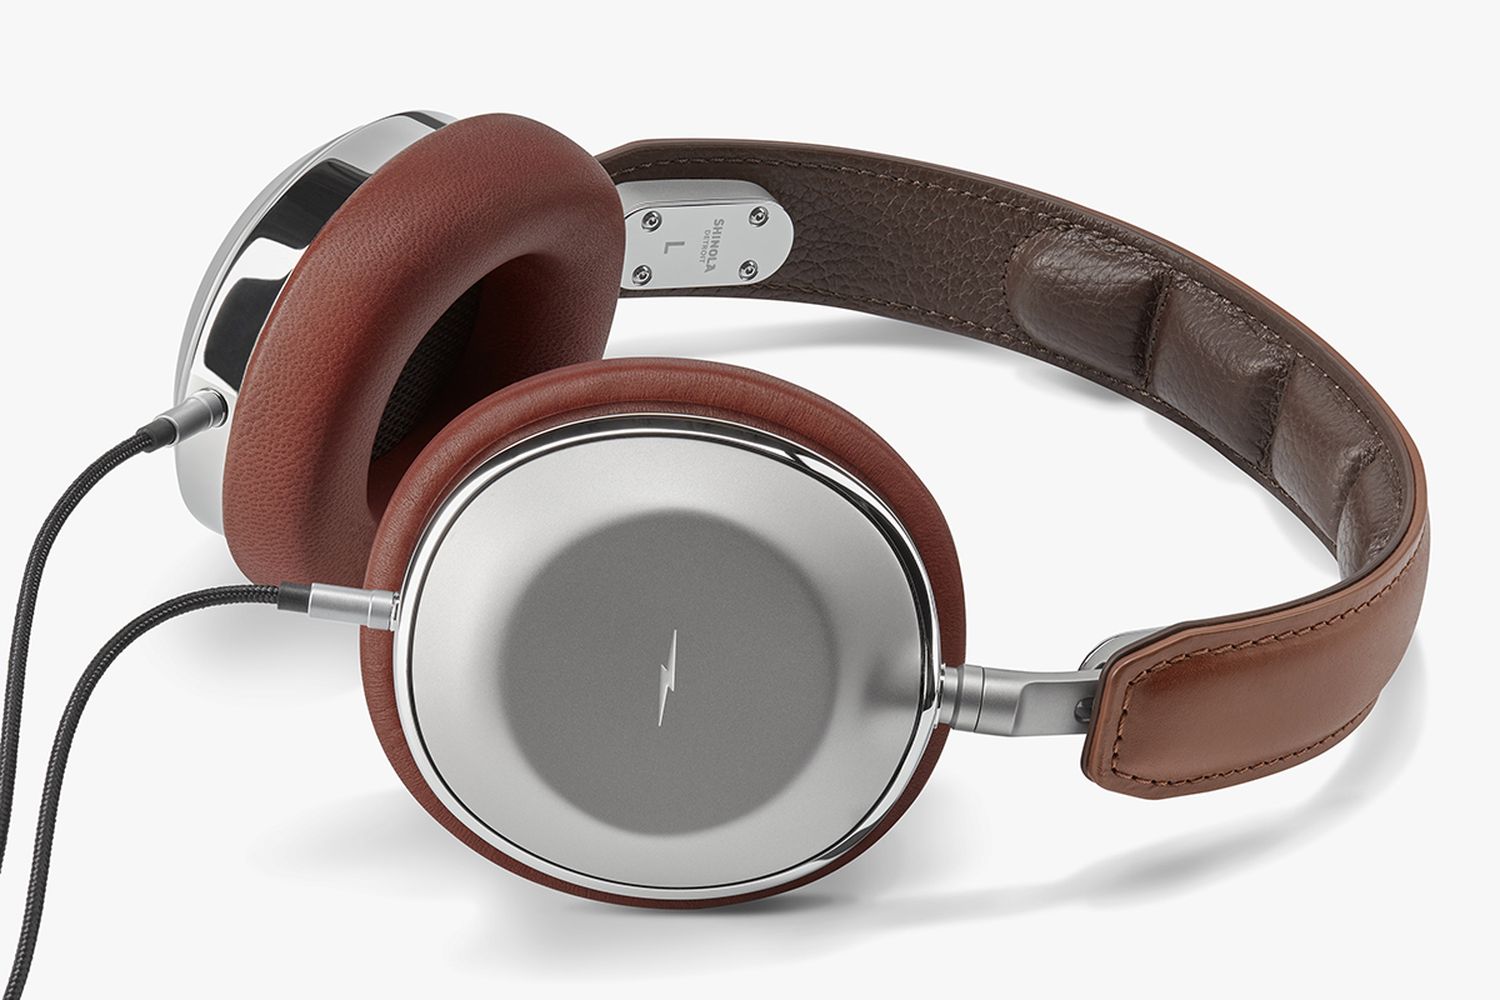 The Canfield Over-Ear Headphones